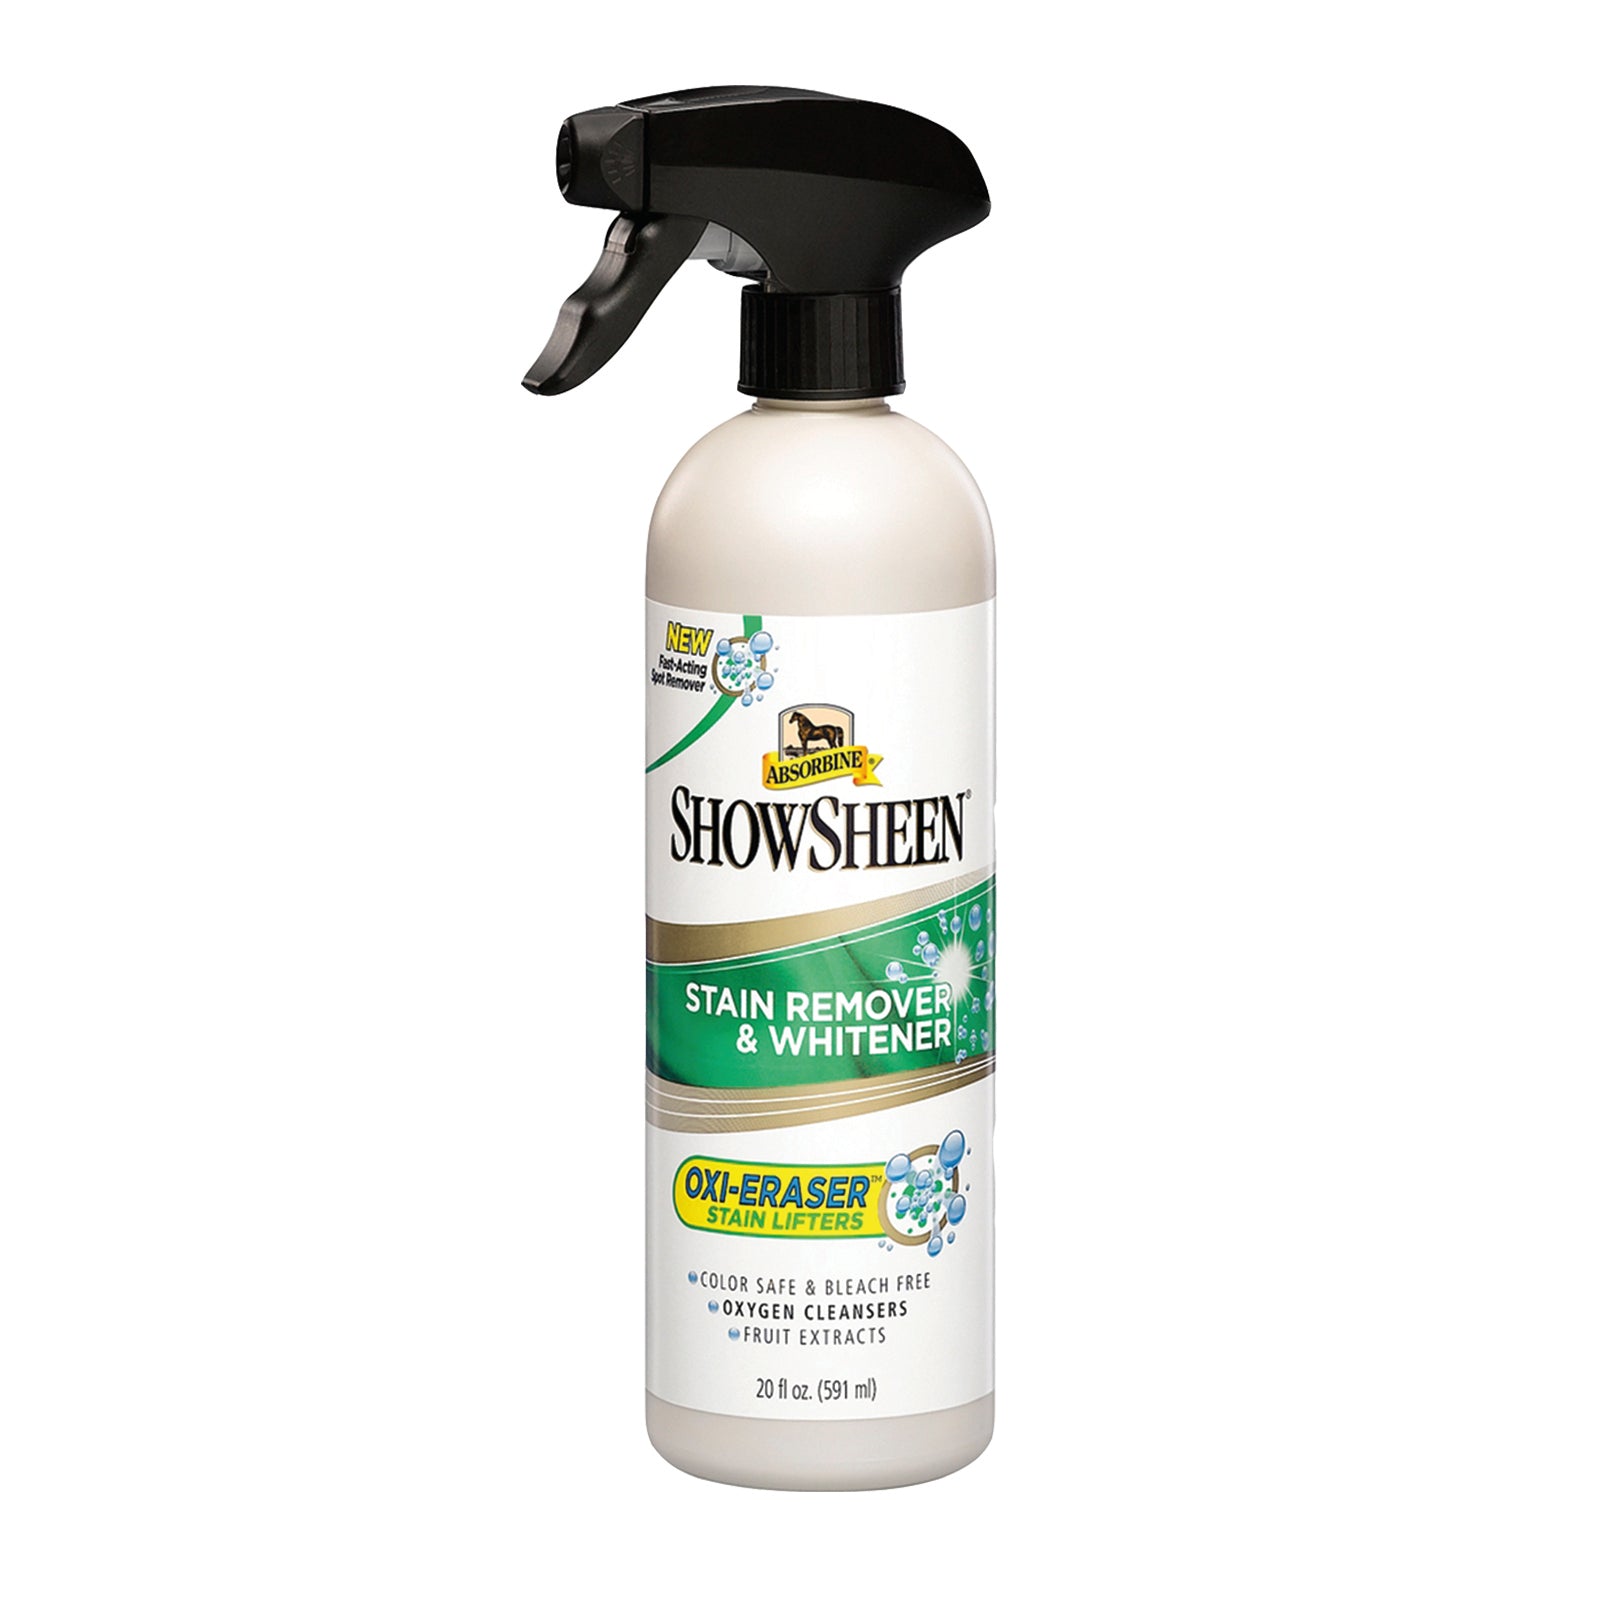 Showsheen Stain Remover and Whitener oxi-eraser stain lifters.  Color safe and bleach free, oxygen cleansers, fruit extracts.  Front of Showsheen white bottle with green label and black sprayer.